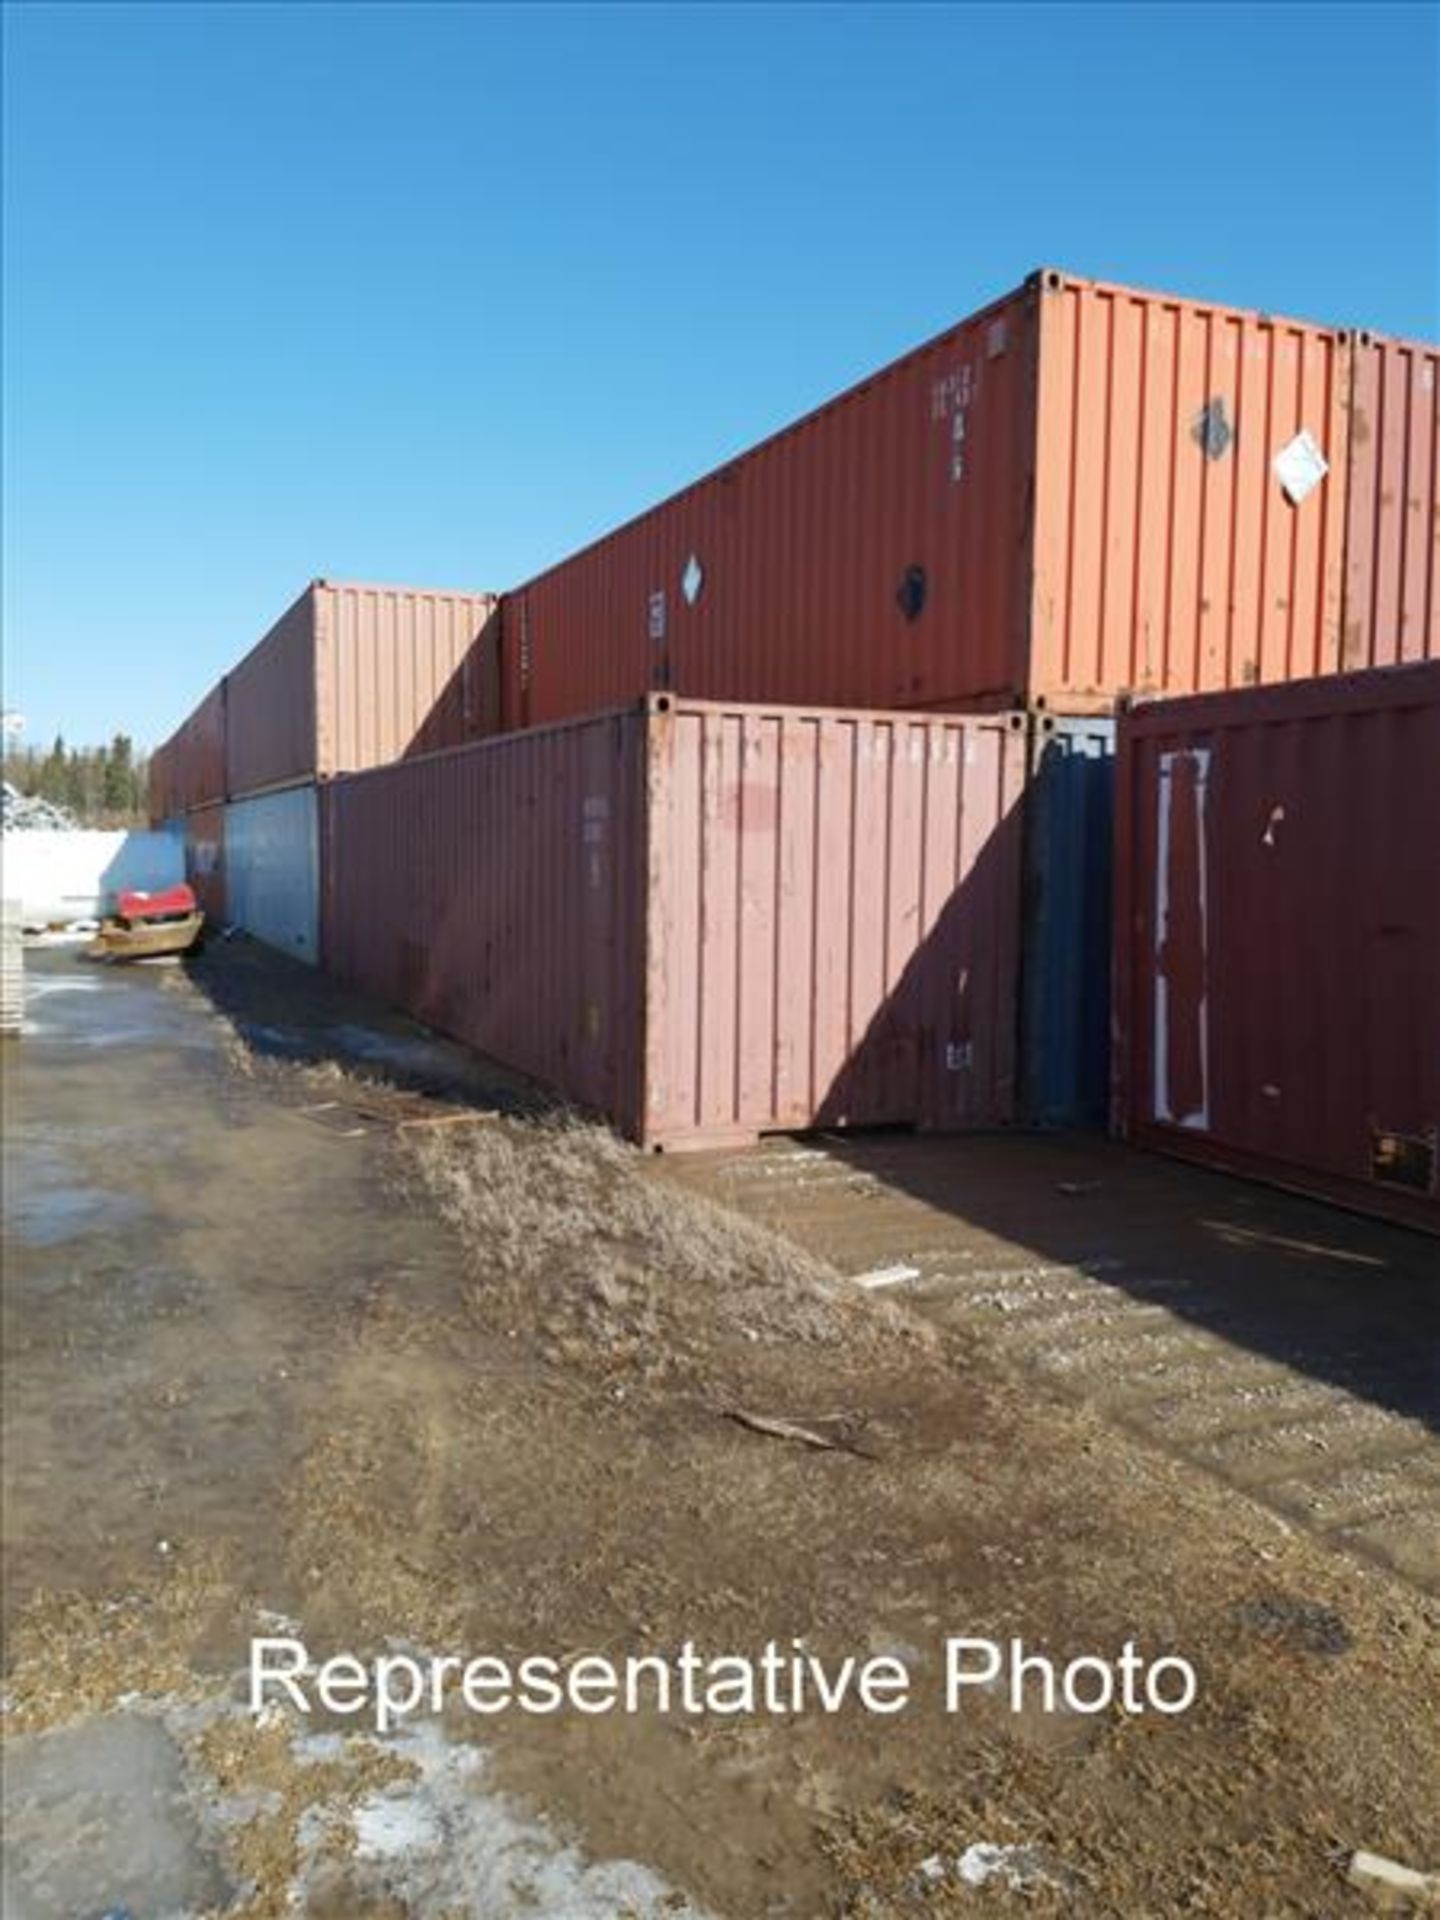 40 ft. Shipping Container (Empty) (Tag No. N/A) [Sea Container N/A] {Location Moosonee} - Image 2 of 2